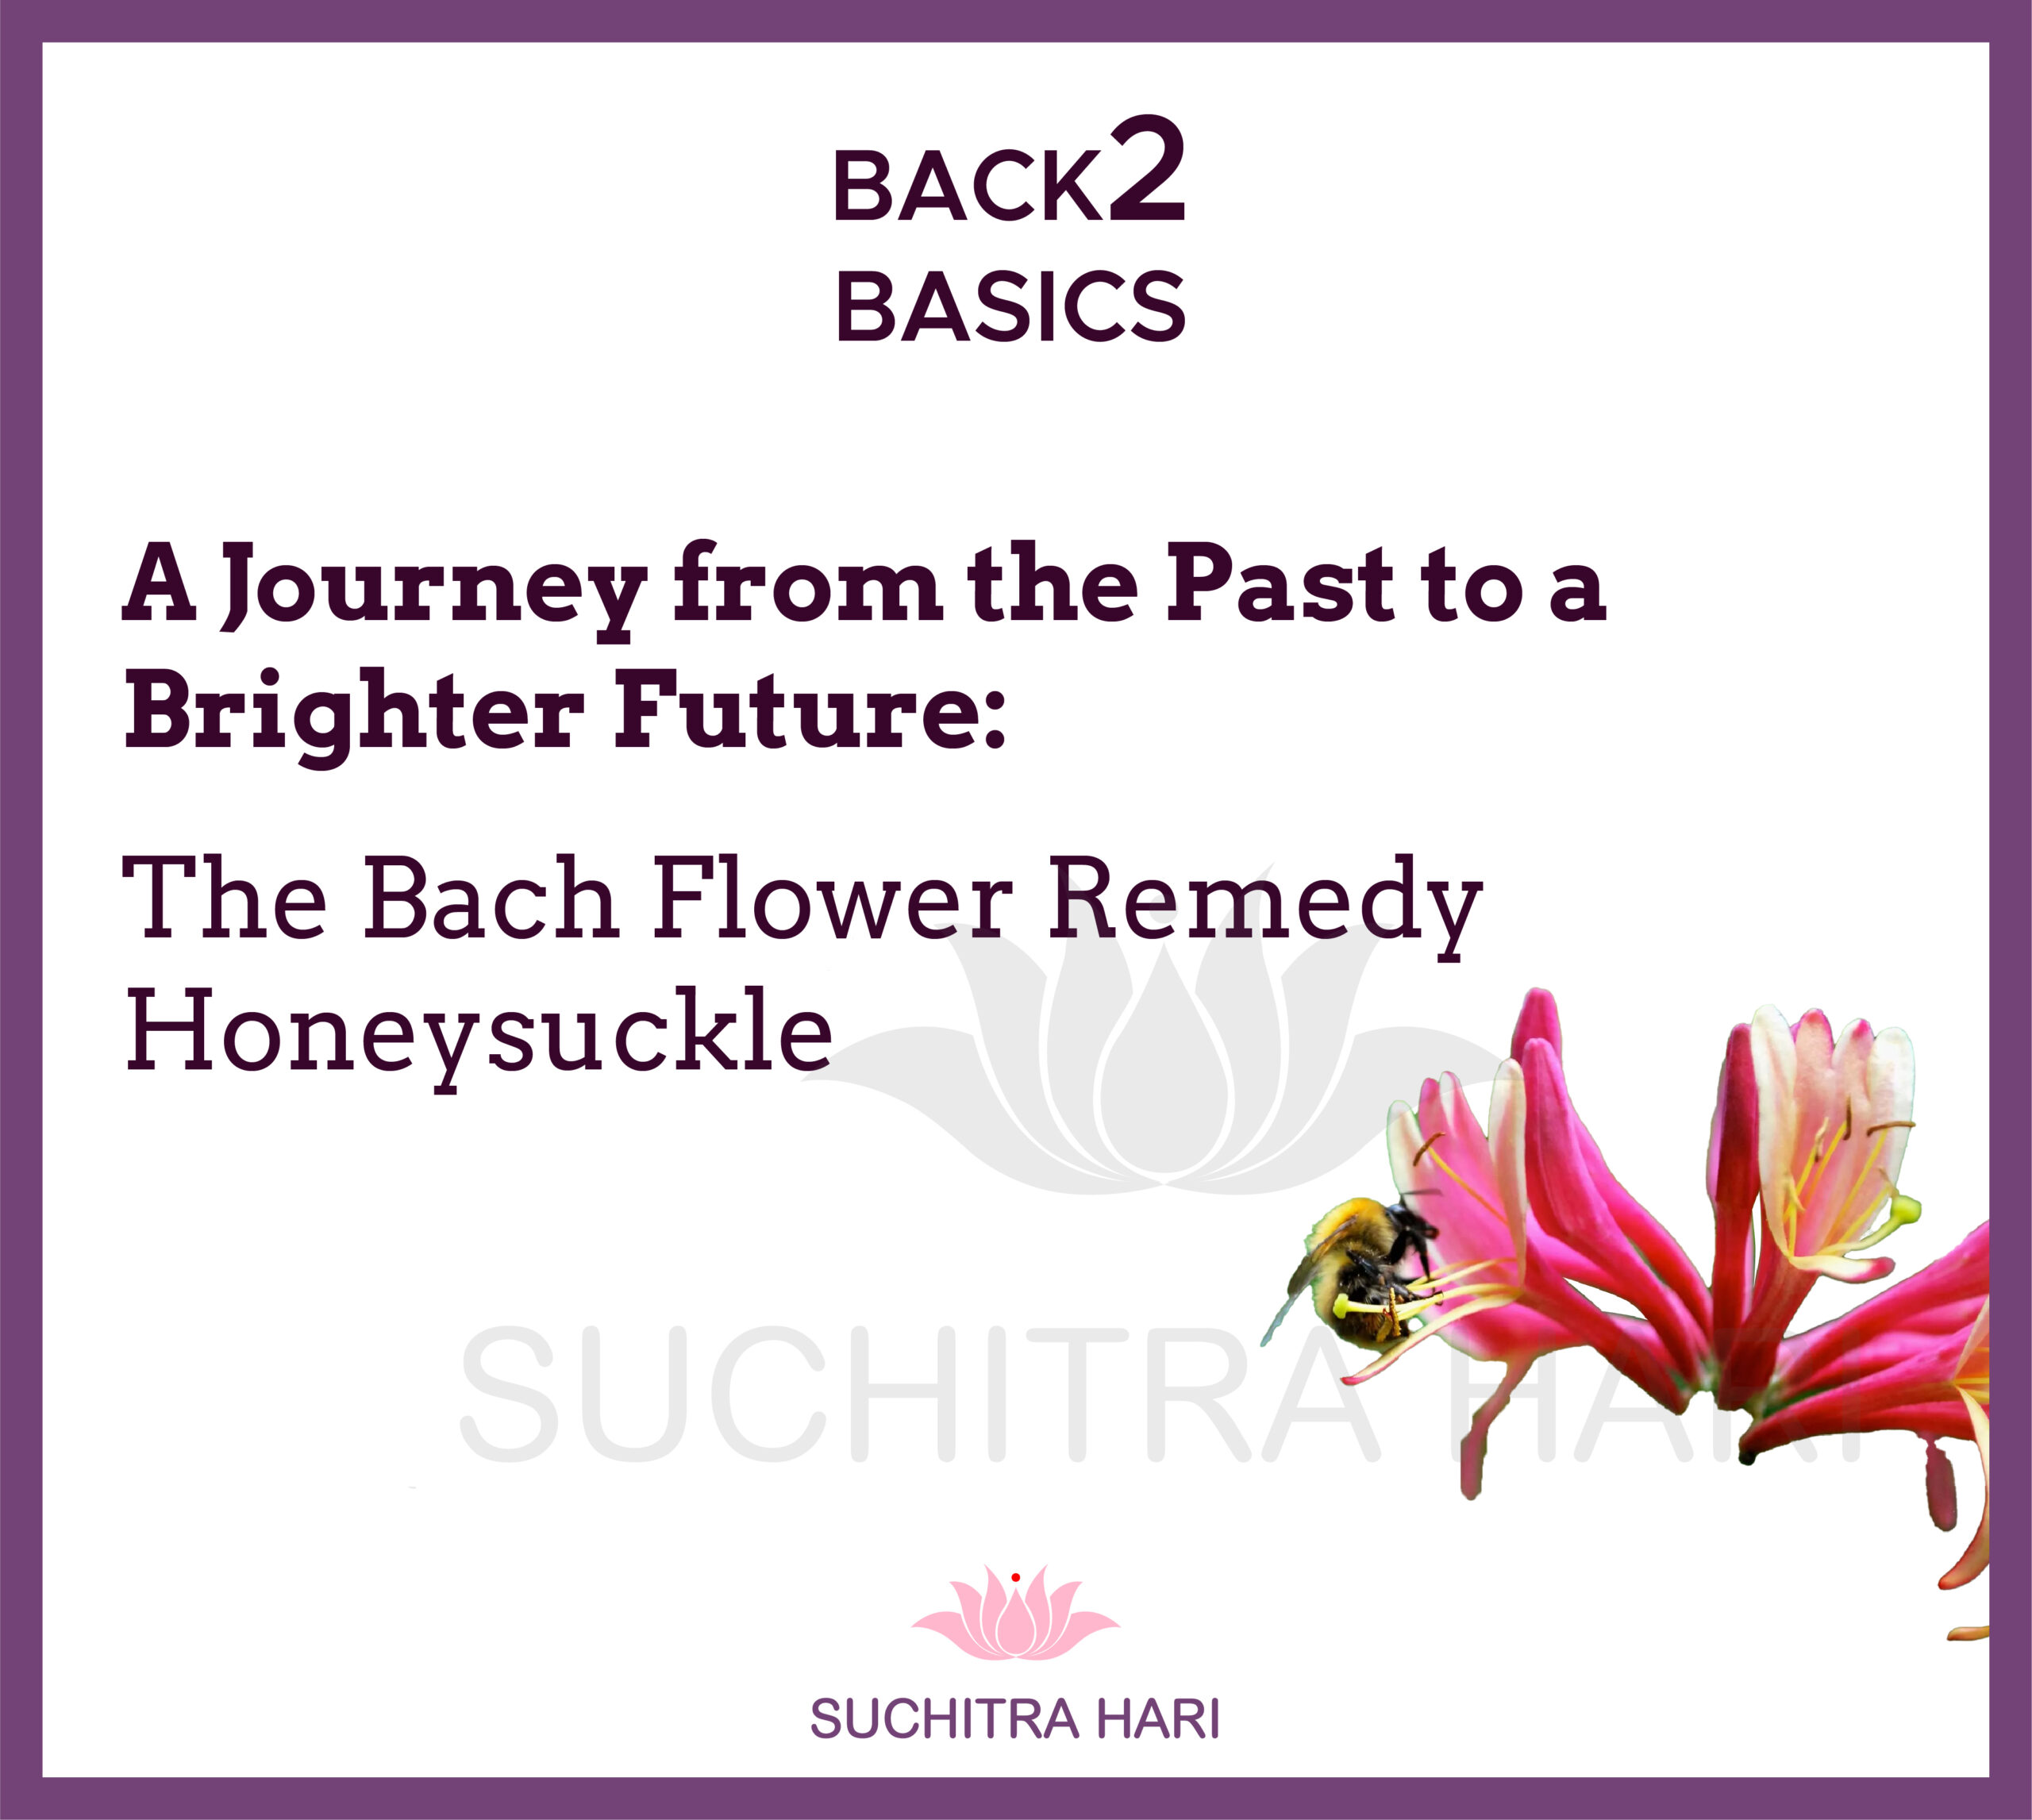 A Journey from the Past to a Brighter Future: The Bach Flower Remedy Honeysuckle